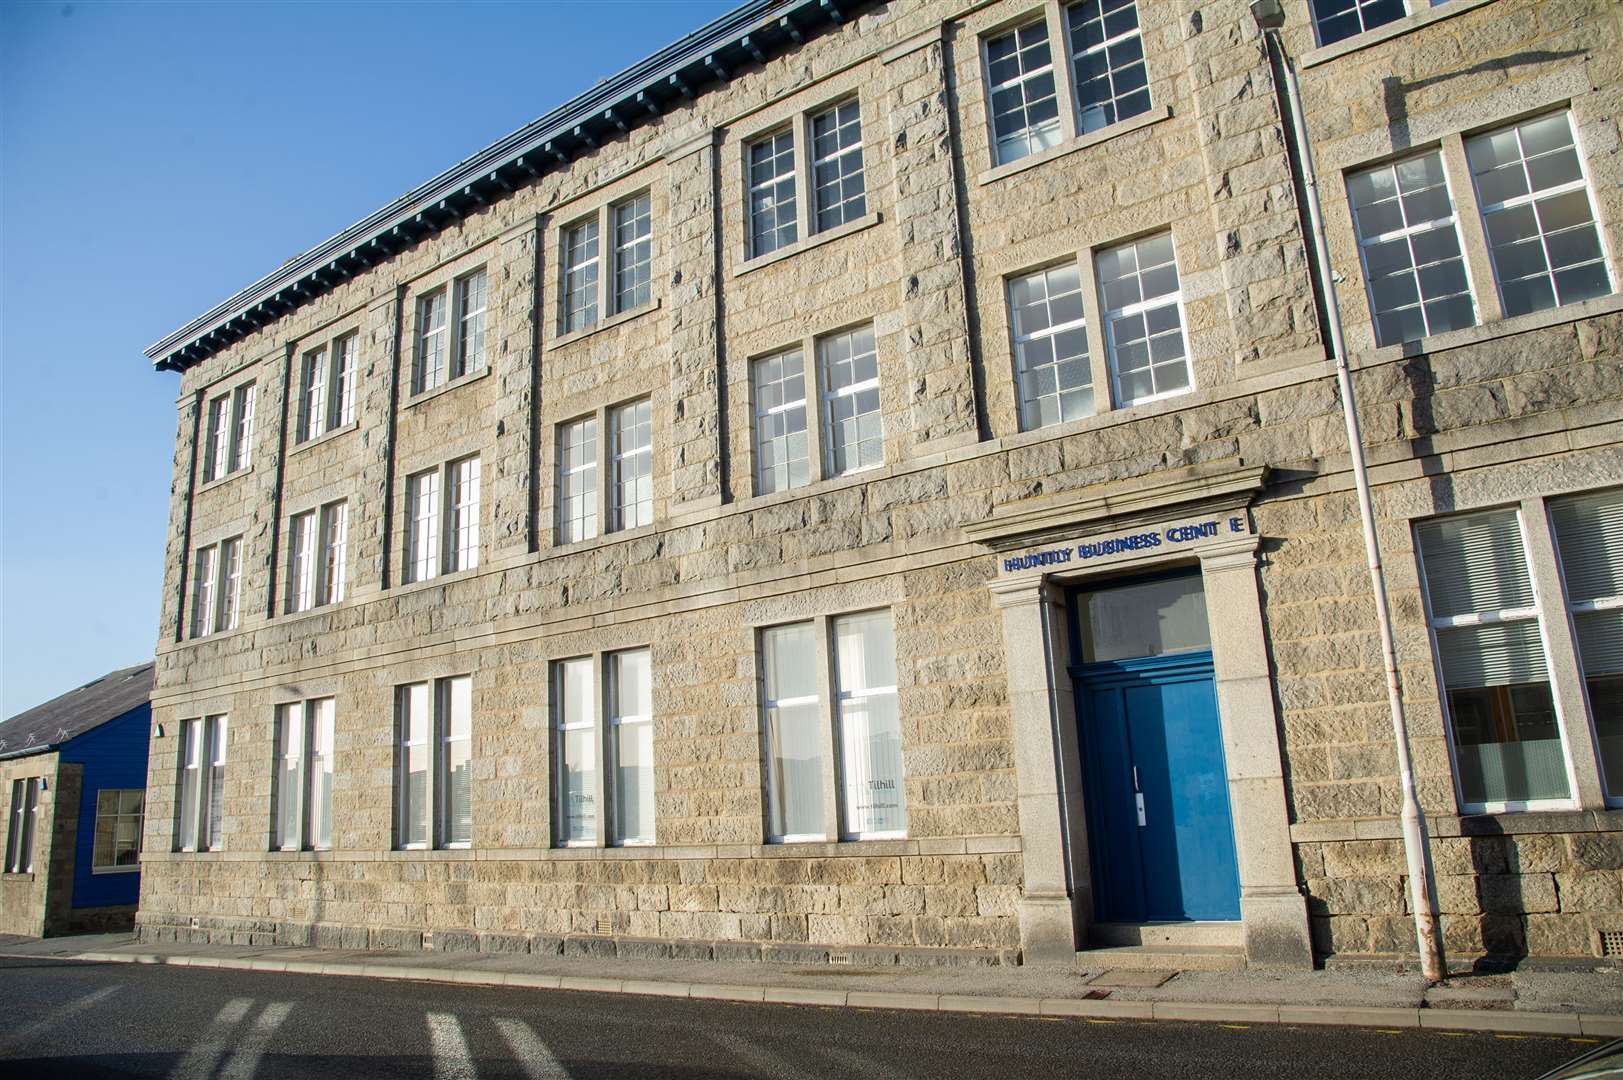 Huntly Business Centre on Gordon Street where the new hub is located. Picture: Daniel Forsyth.